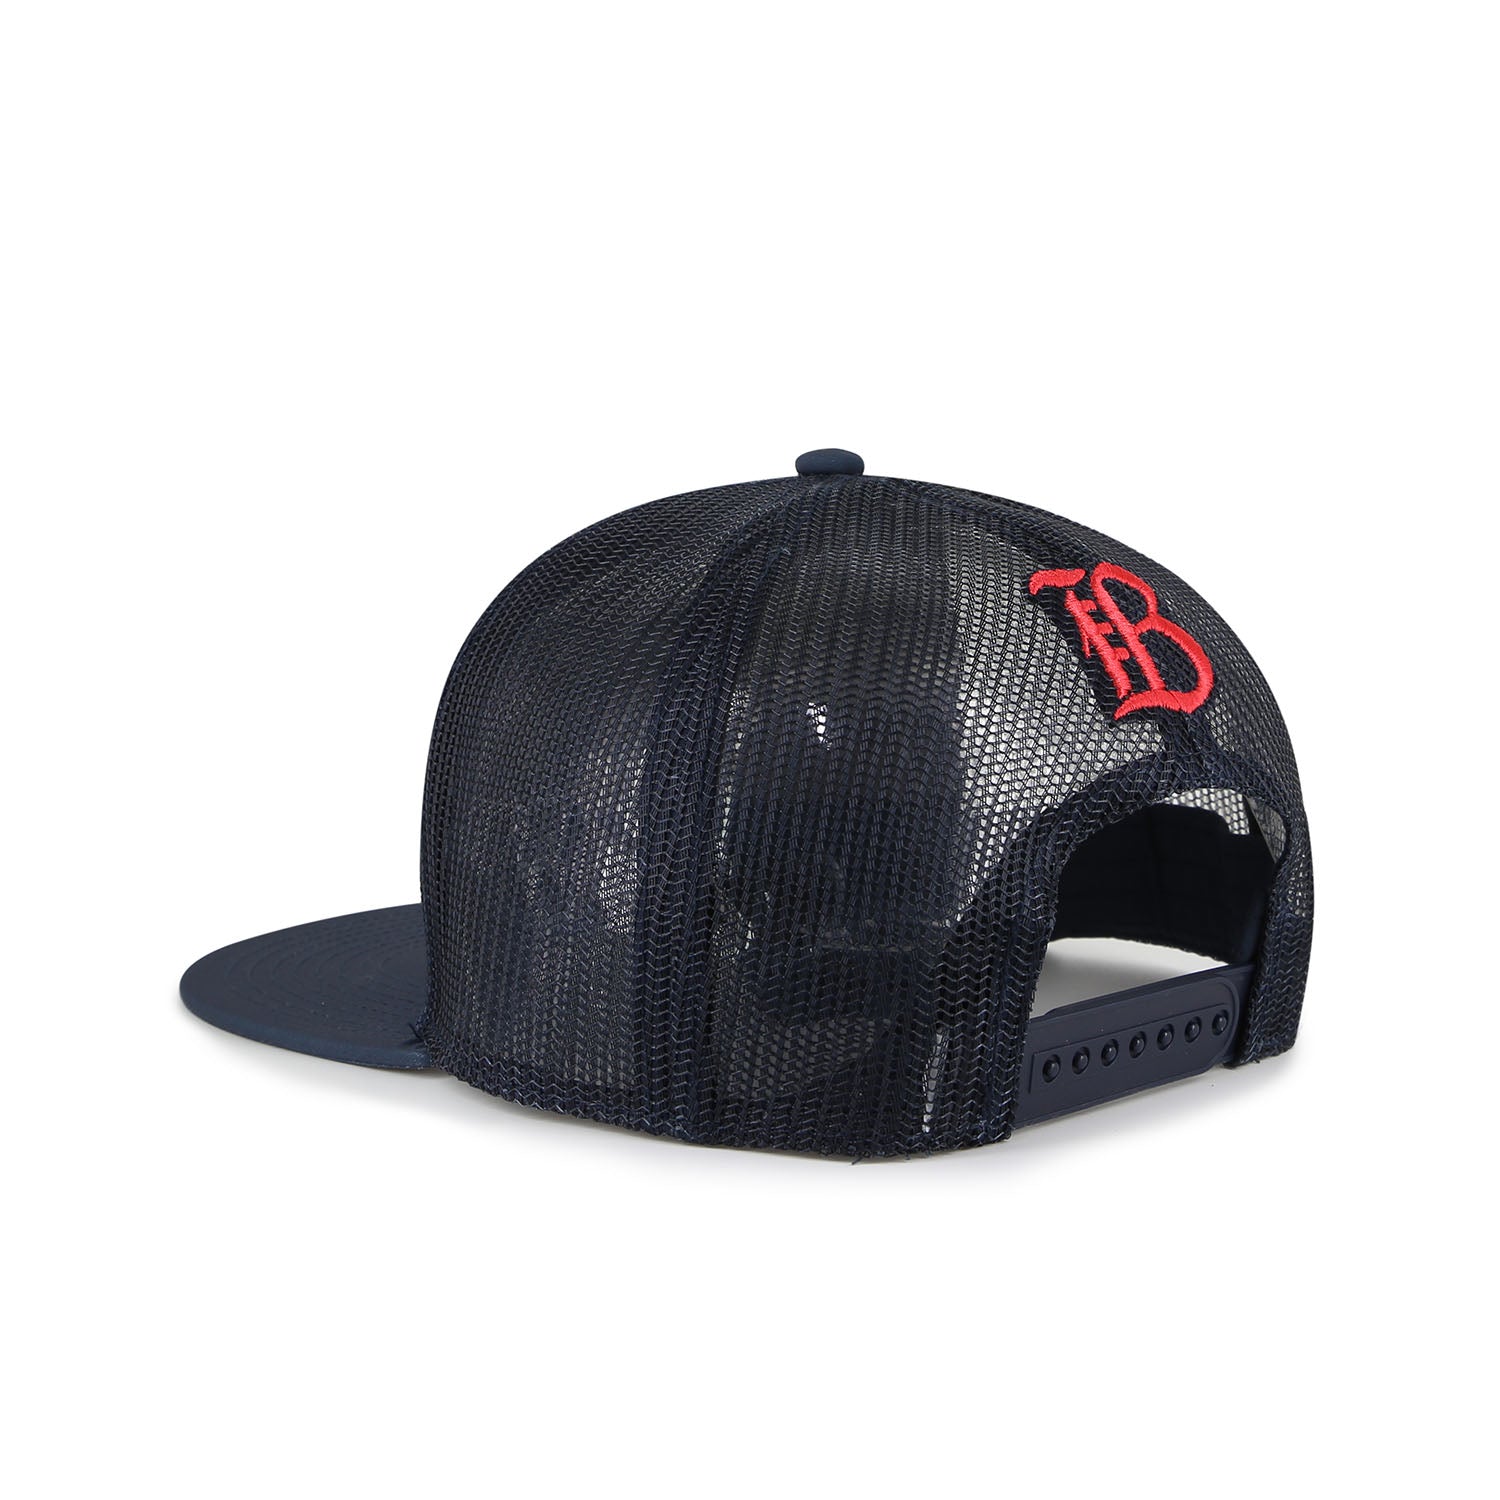 Adult The Game Bay FC Navy Trucker Hat - Angled Rear Left Side View